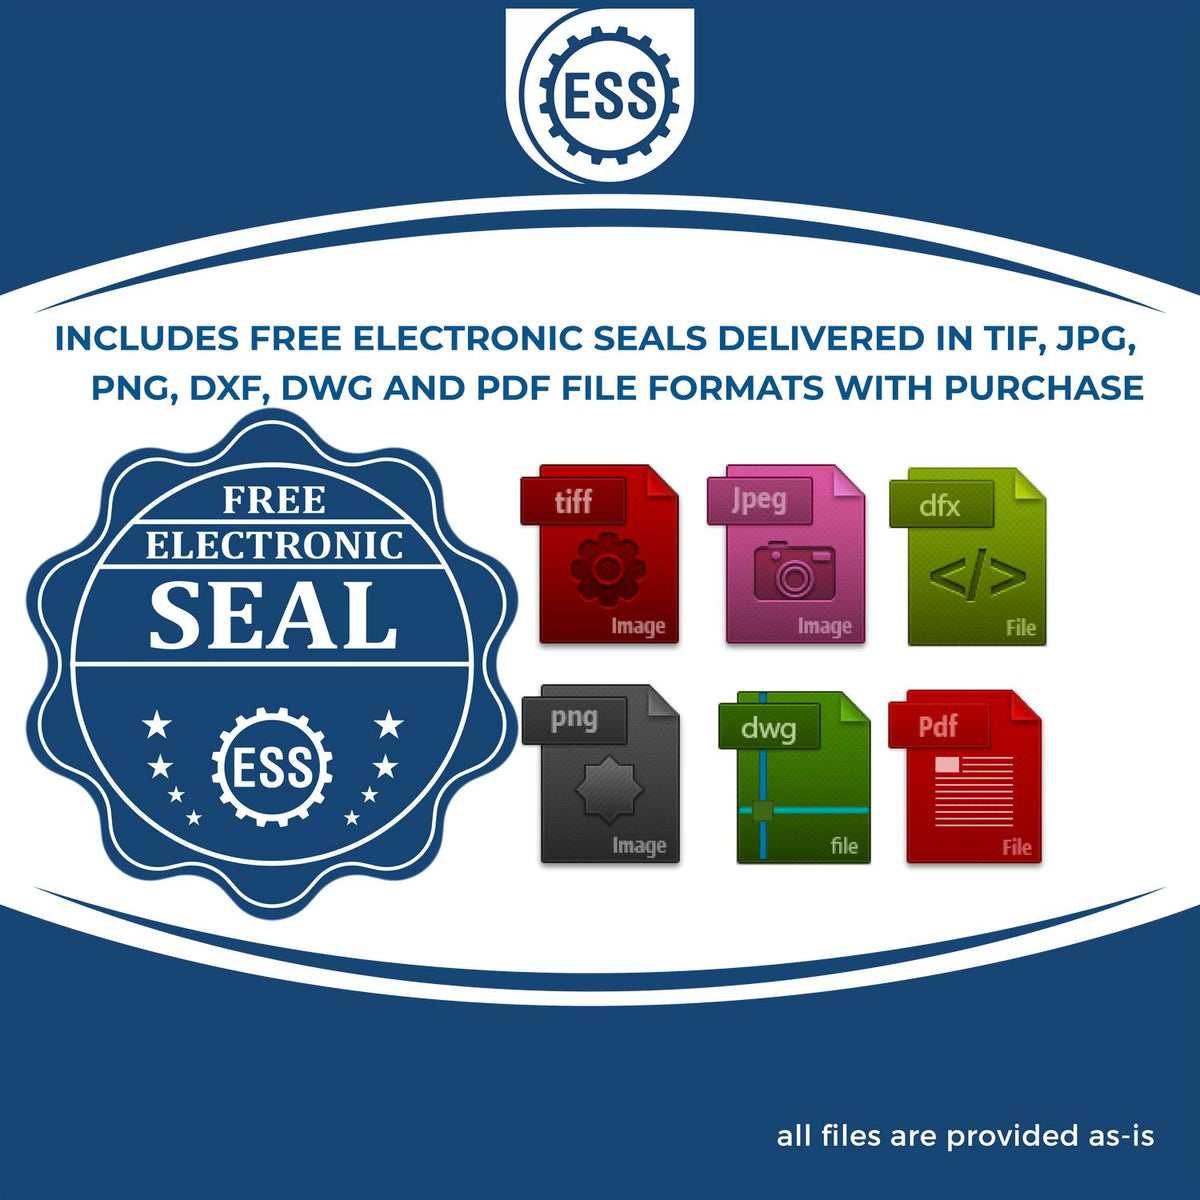 An infographic for the free electronic seal for the Premium MaxLight Pre-Inked Louisiana Engineering Stamp illustrating the different file type icons such as DXF, DWG, TIF, JPG and PNG.